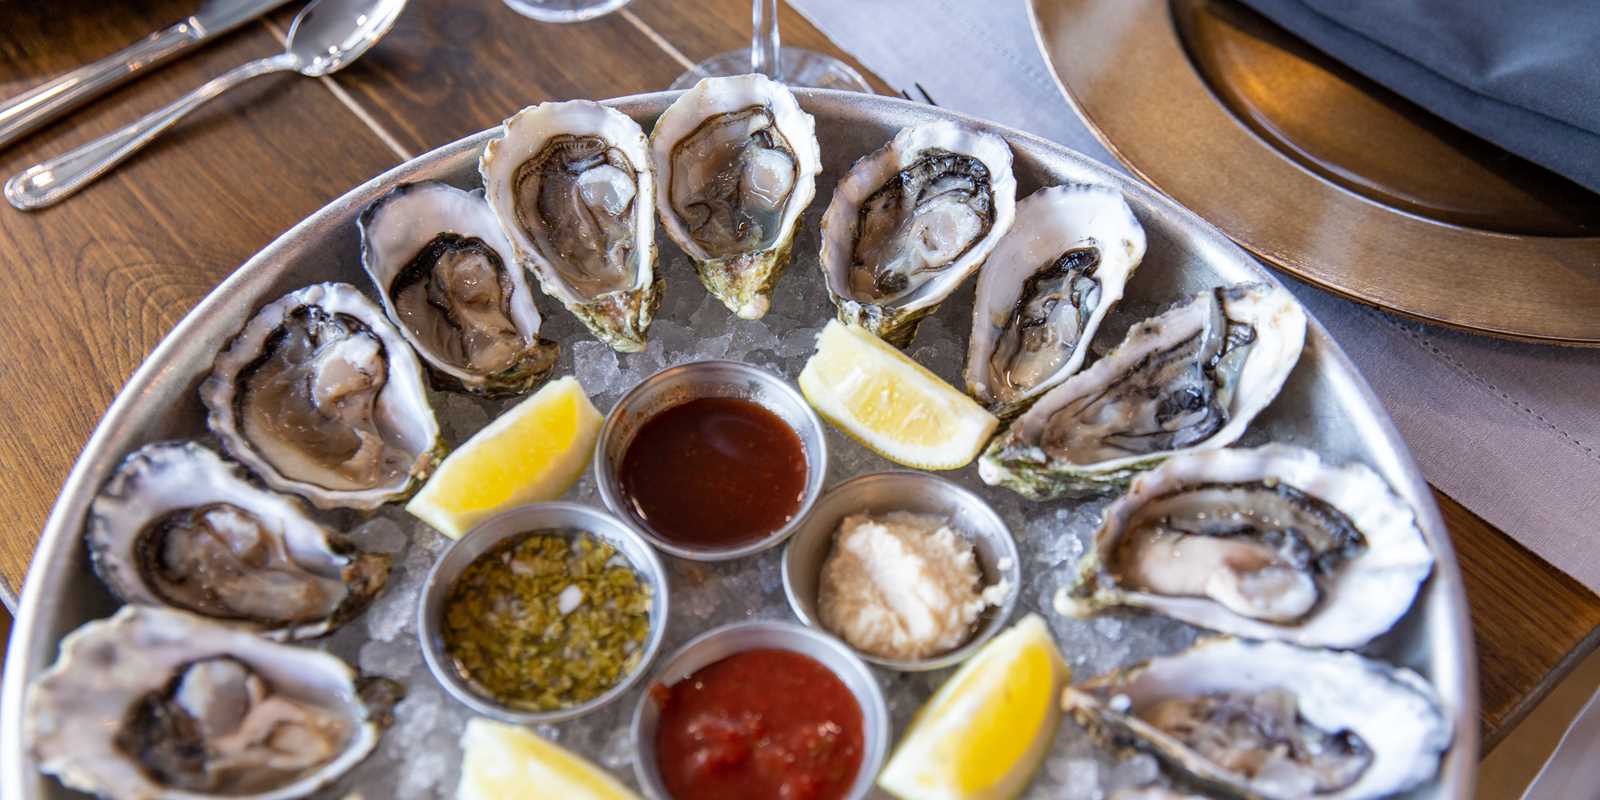 The Oyster Bar, Hours + Location